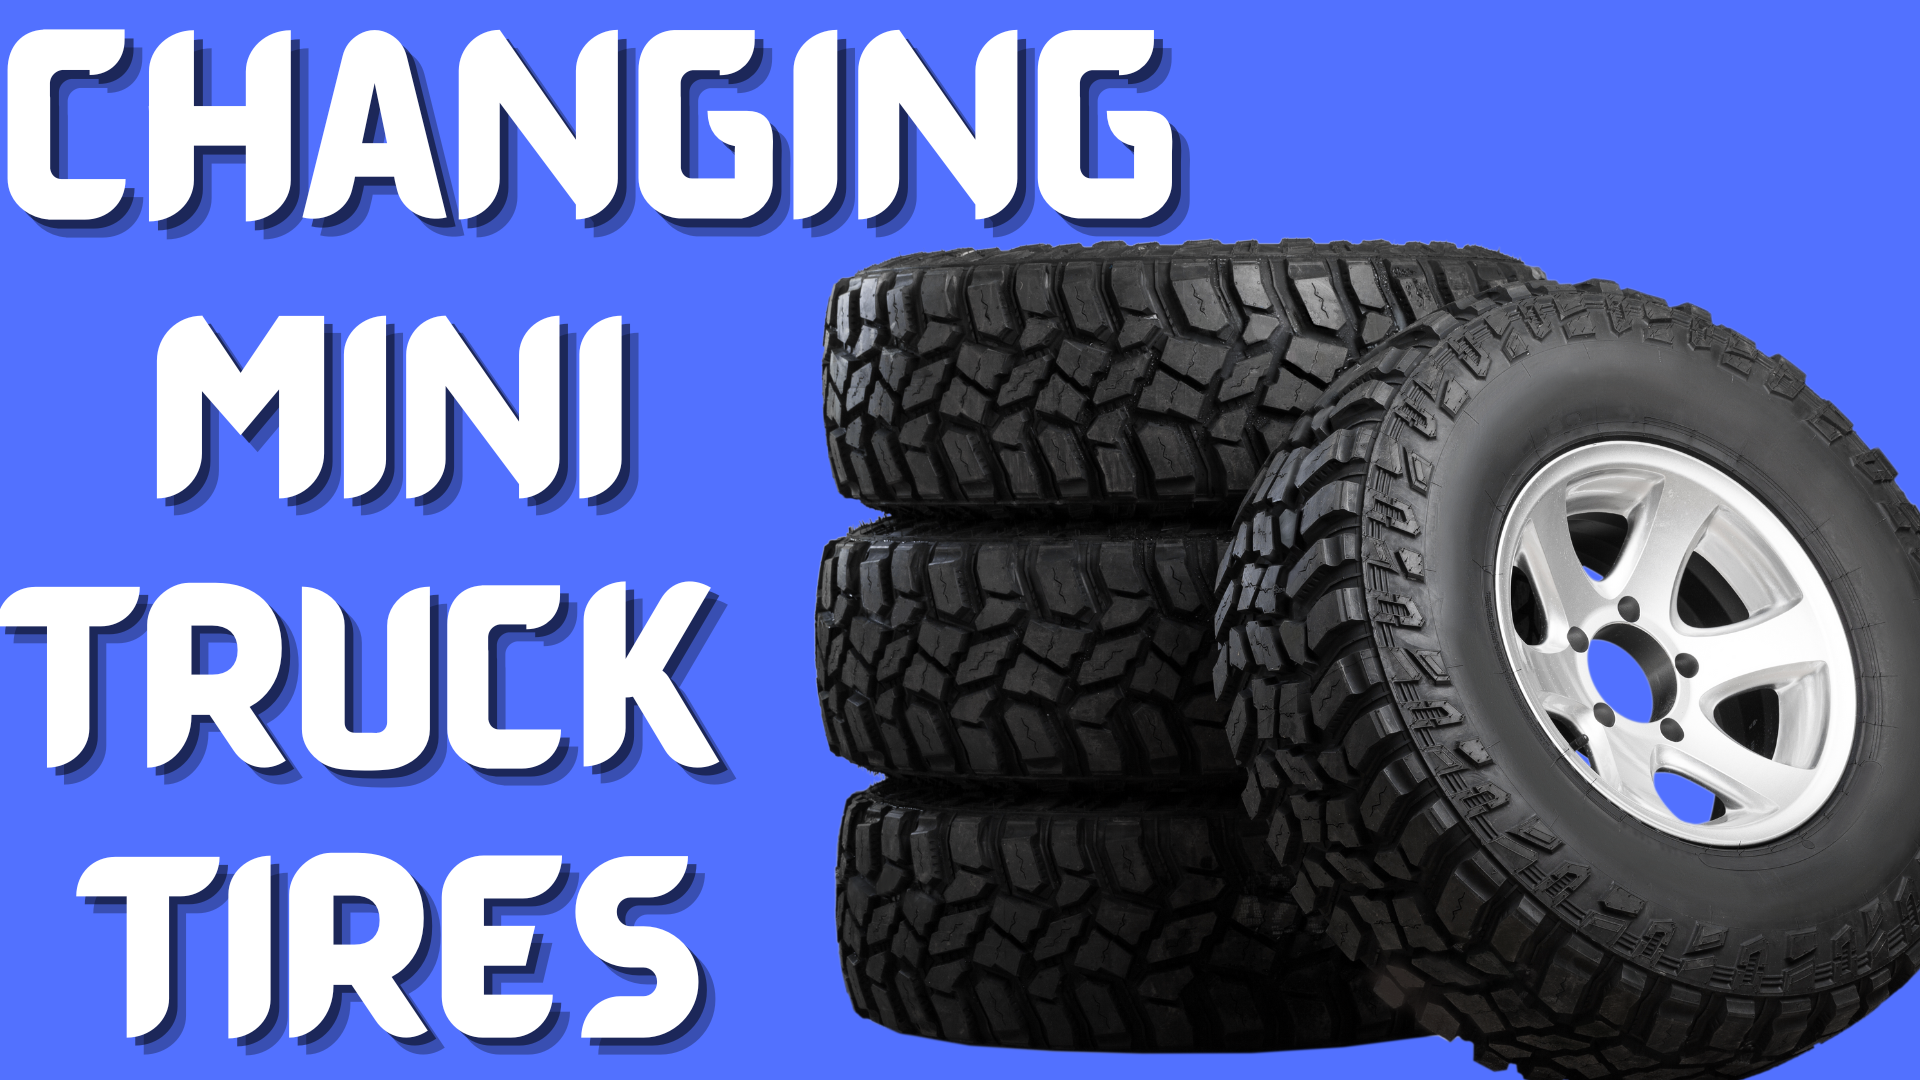 You should know when your truck needs new sets of tires. After reading this guide, you will be able to know when to replace truck tires.